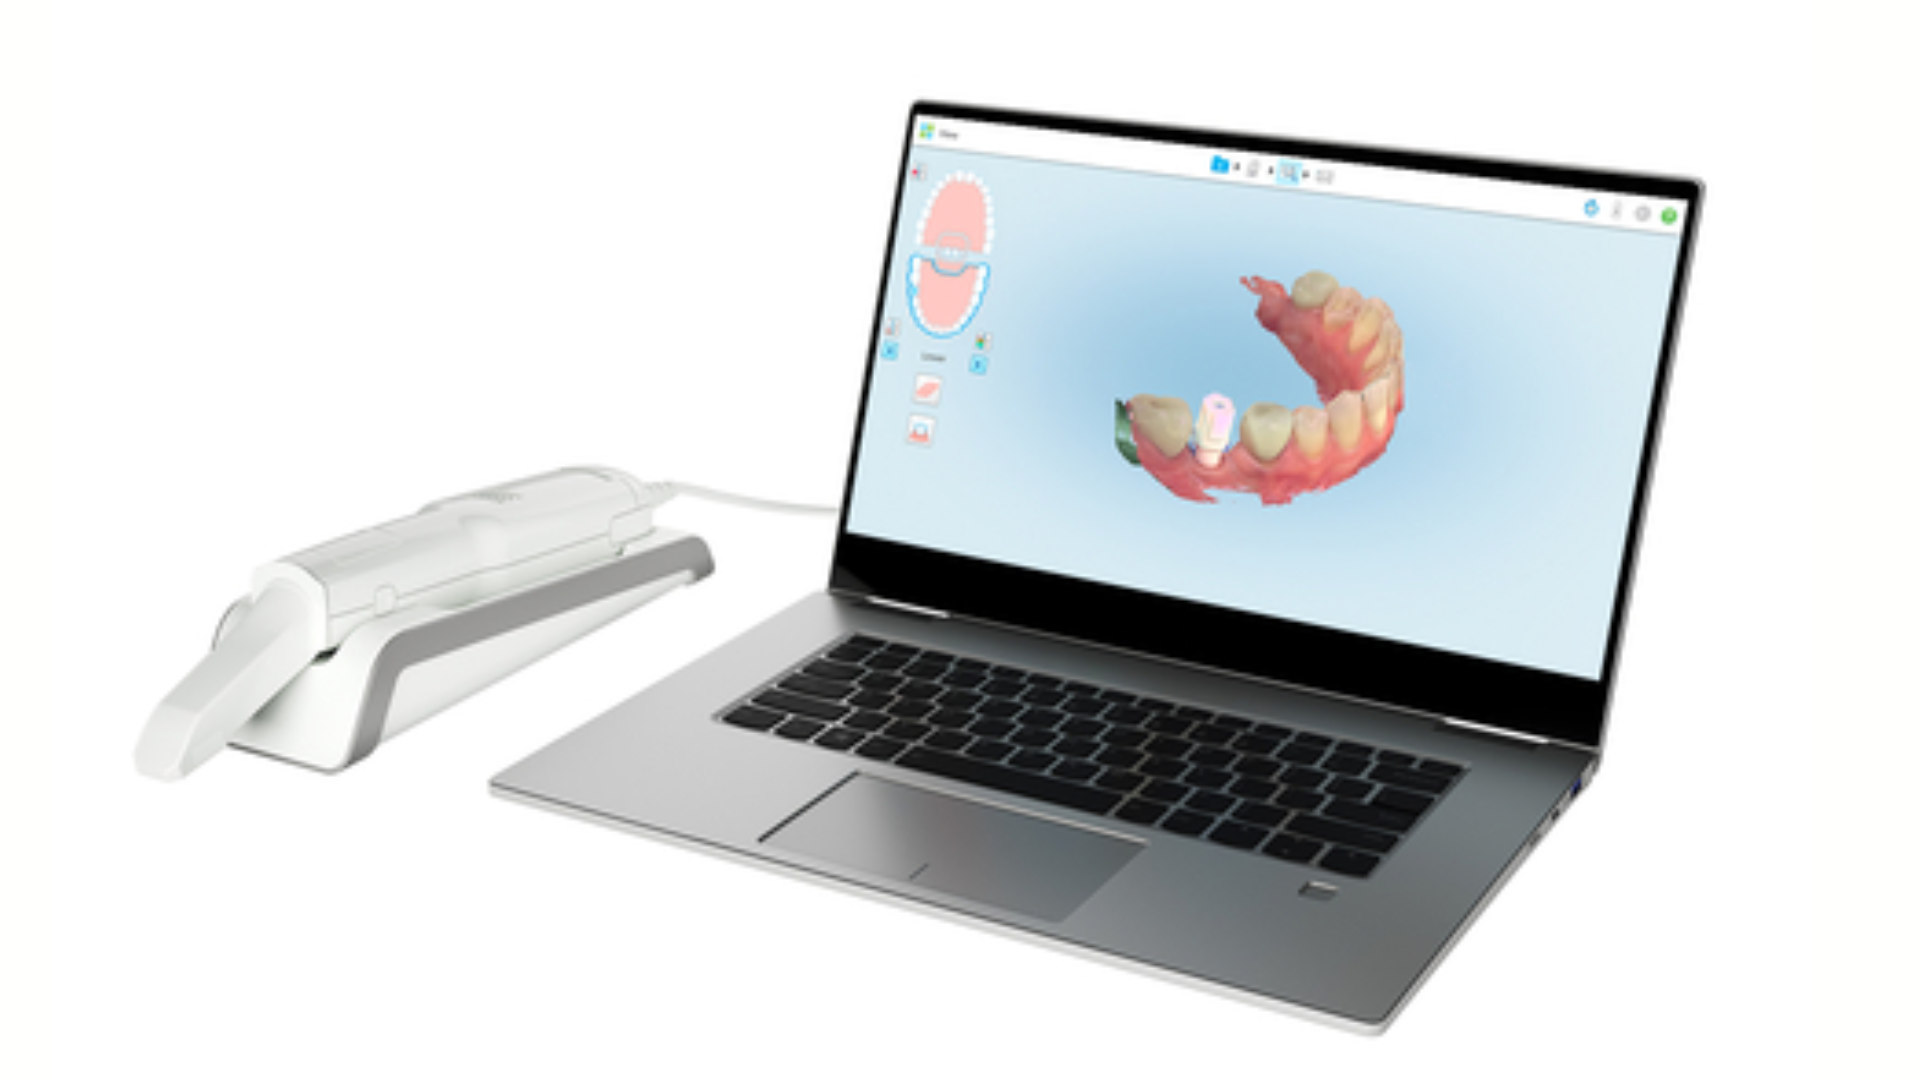 Align Technology and Desktop Metal announced a strategic collaboration to supply iTero Element™ Flex intraoral scanners to Desktop Labs.